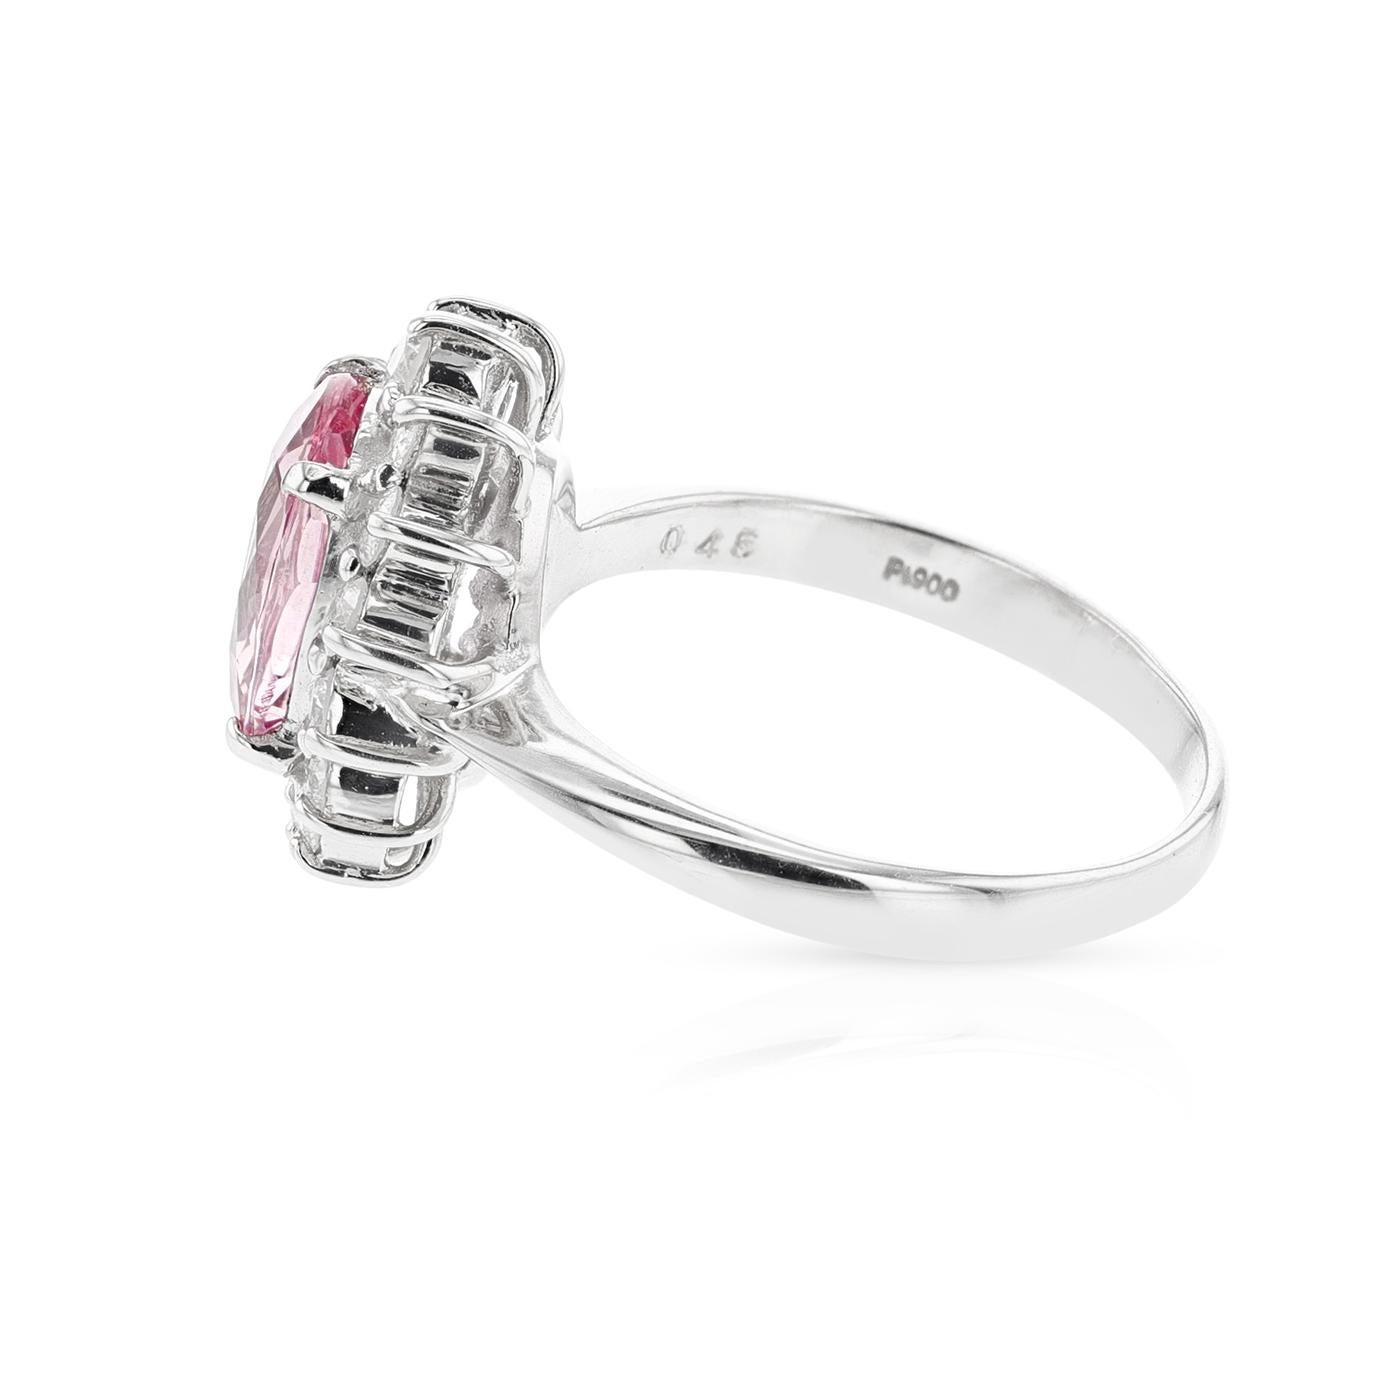 Women's or Men's GIA Certified 2.53 Carat Natural Oval-Shaped Pink Sapphire and Diamond Ring, PT